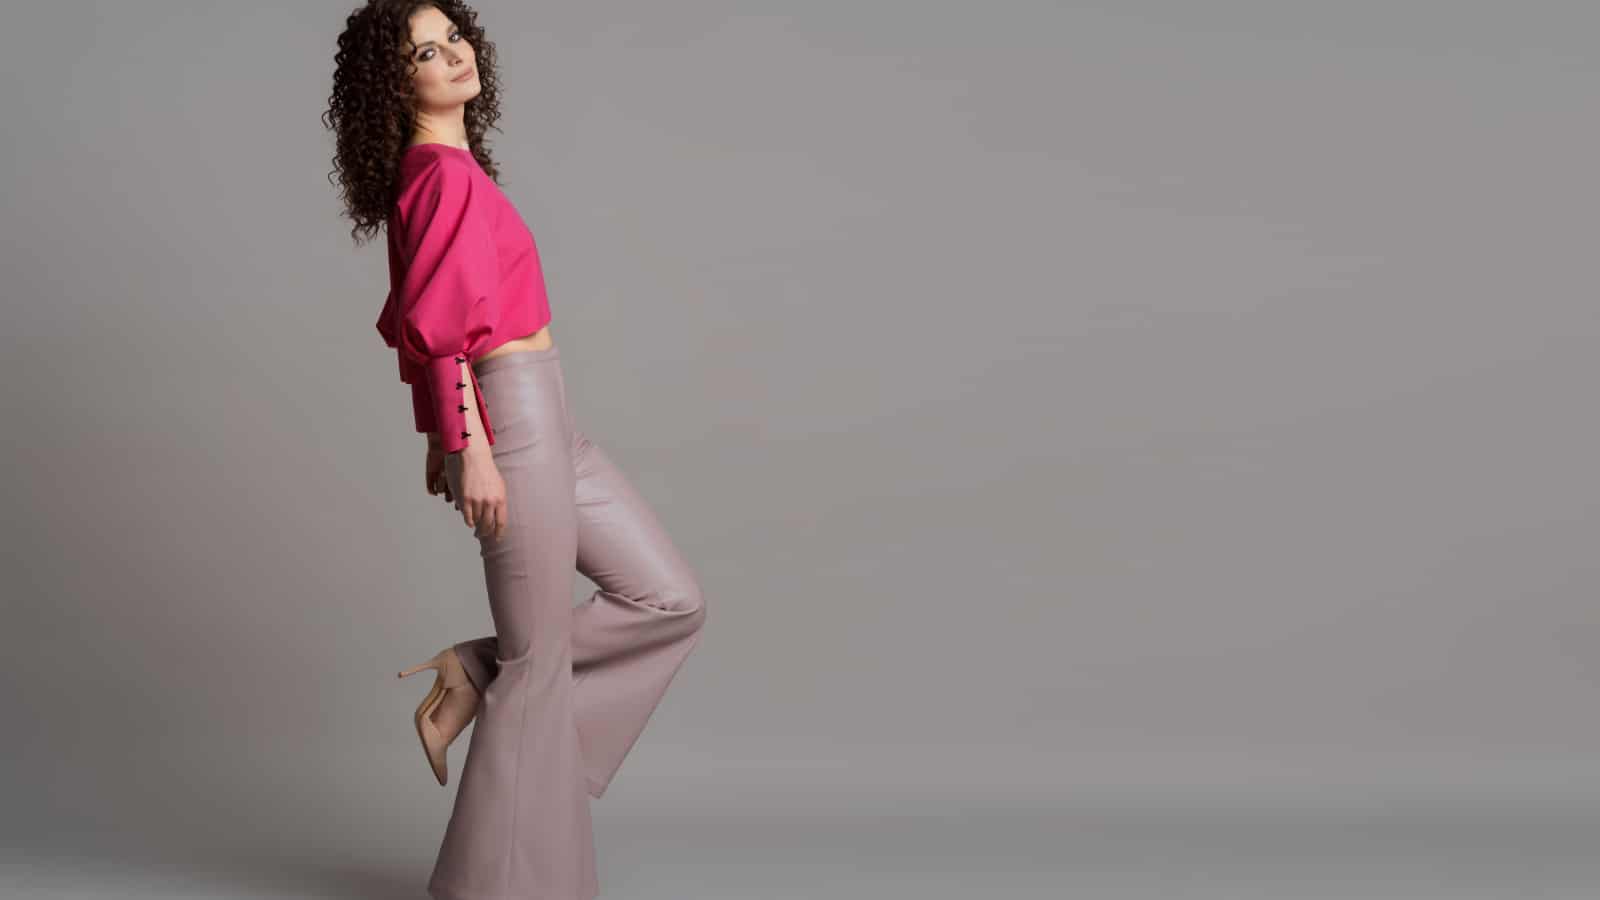 Studio shot of pretty fashion model in pastel purple leather trousers and pink blouse on gray background with copy space